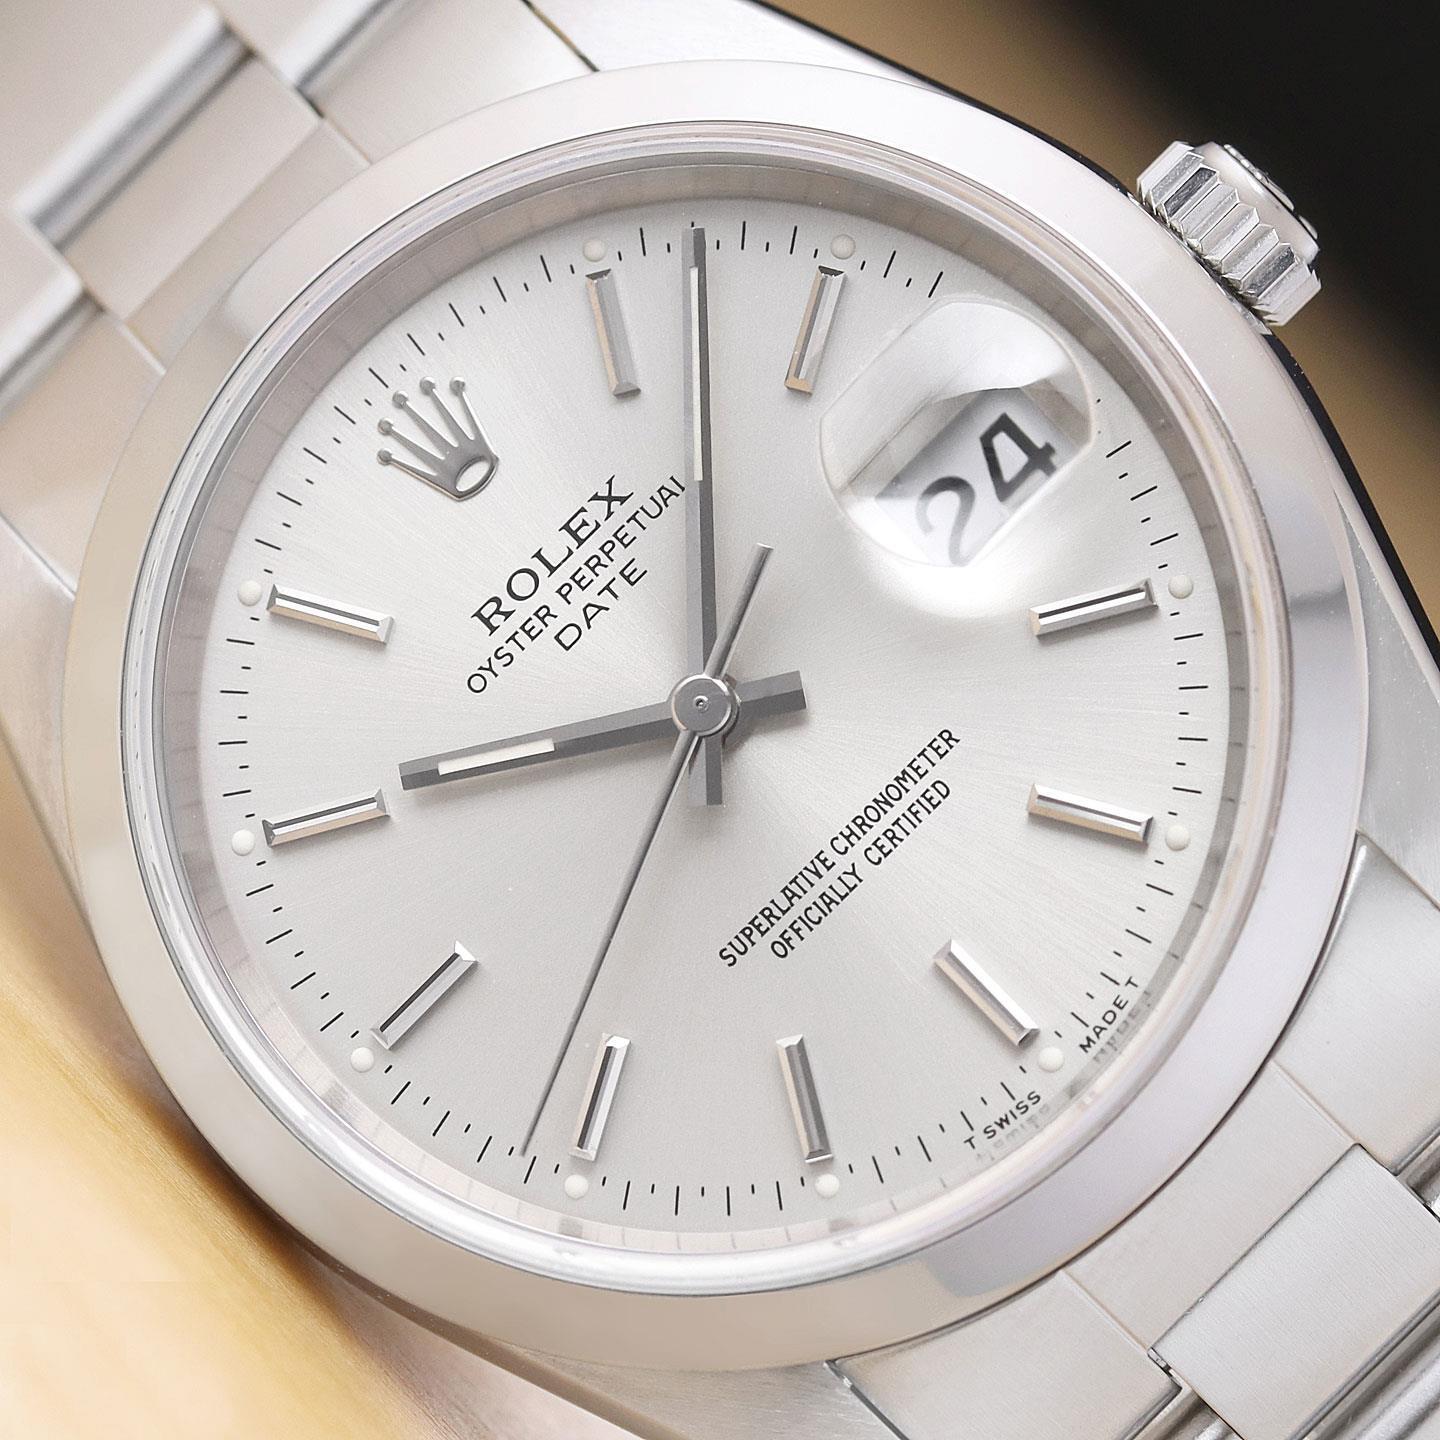 Forlænge overvåge svulst ROLEX MENS OYSTER PERPETUAL DATE 15200 34MM SILVER DIAL STAINLESS STEEL  WATCH | eBay